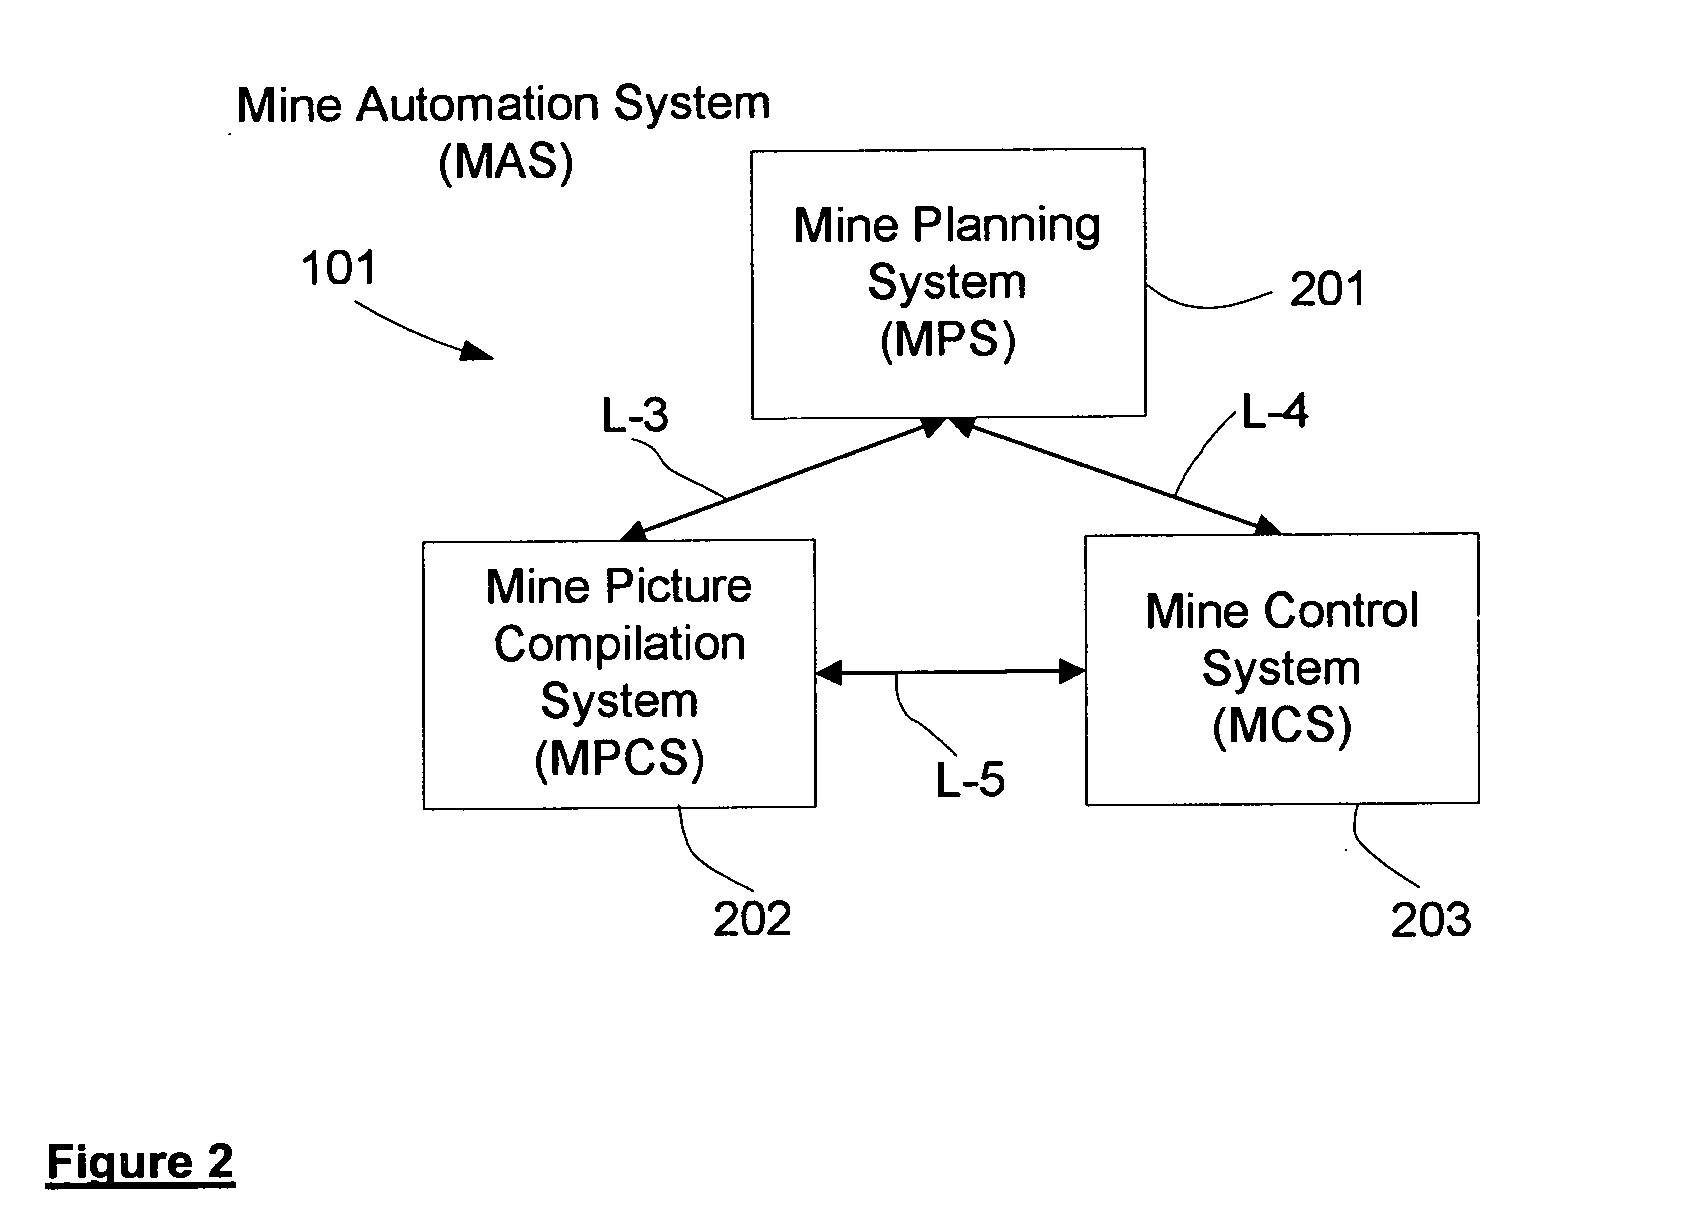 Method and system for regulating movemnet of an autonomous entity between zones